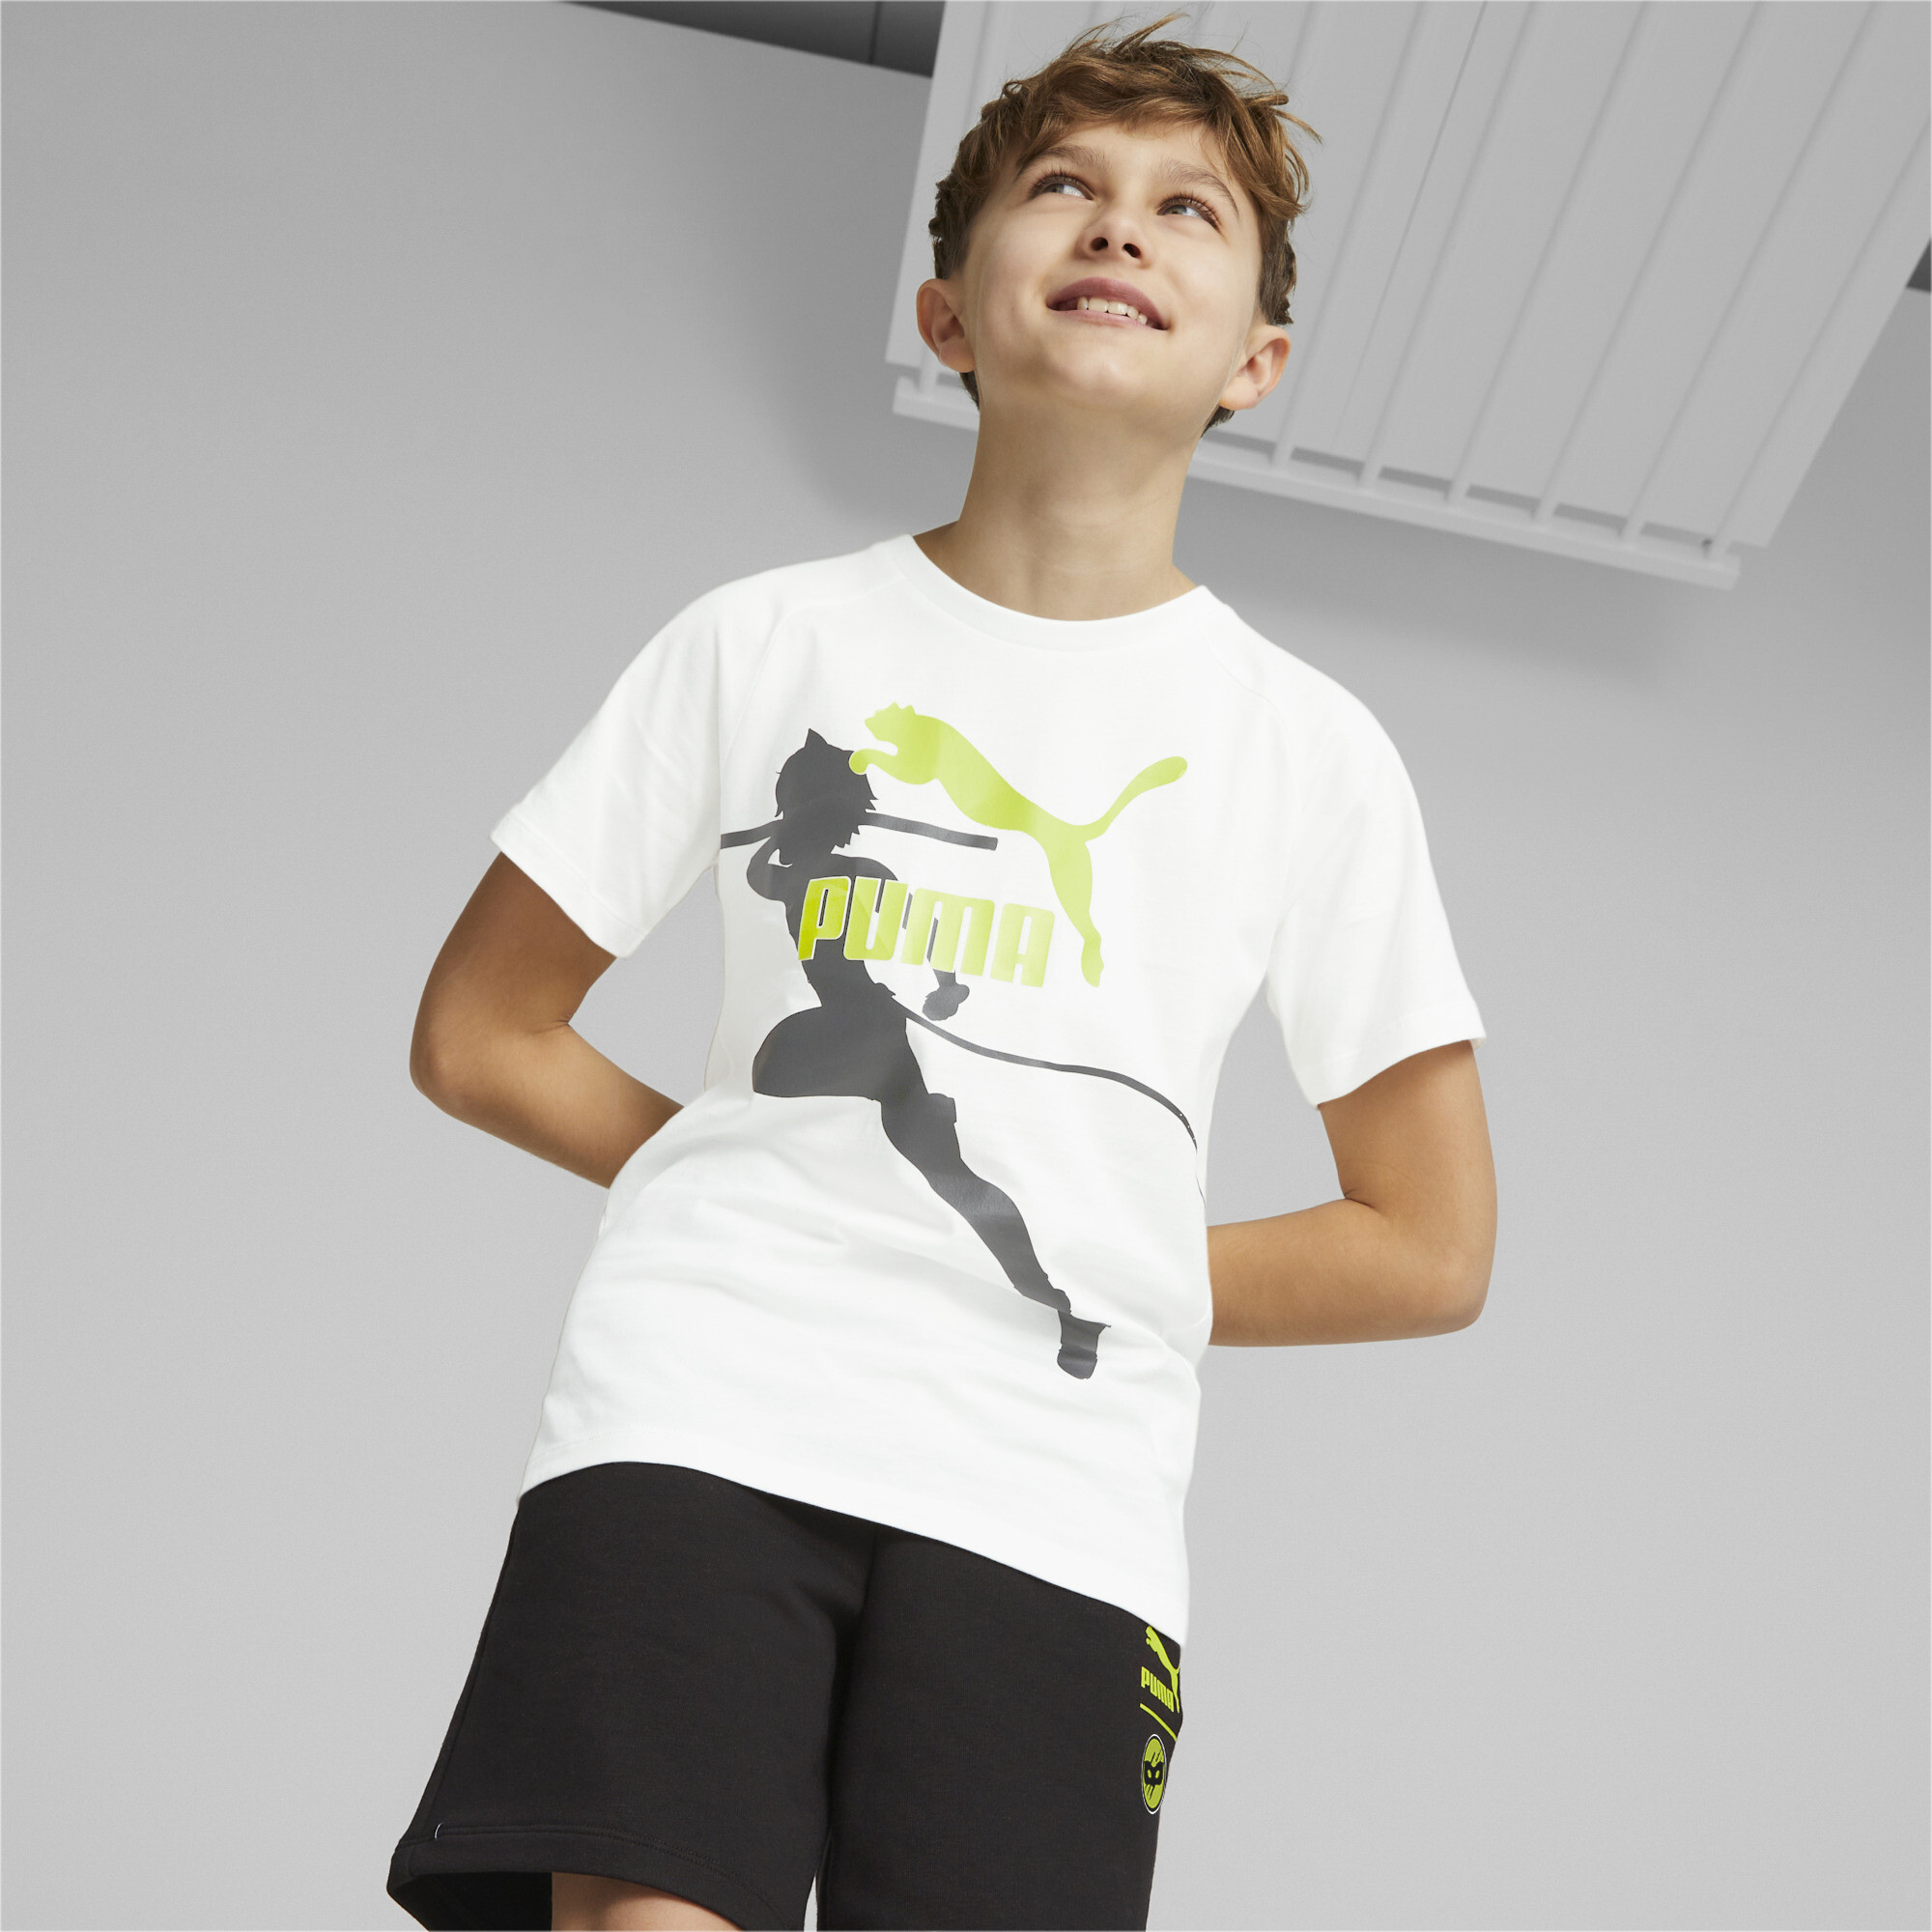 Puma X MIRACULOUS Tee Youth, White, Size 7-8Y, Clothing